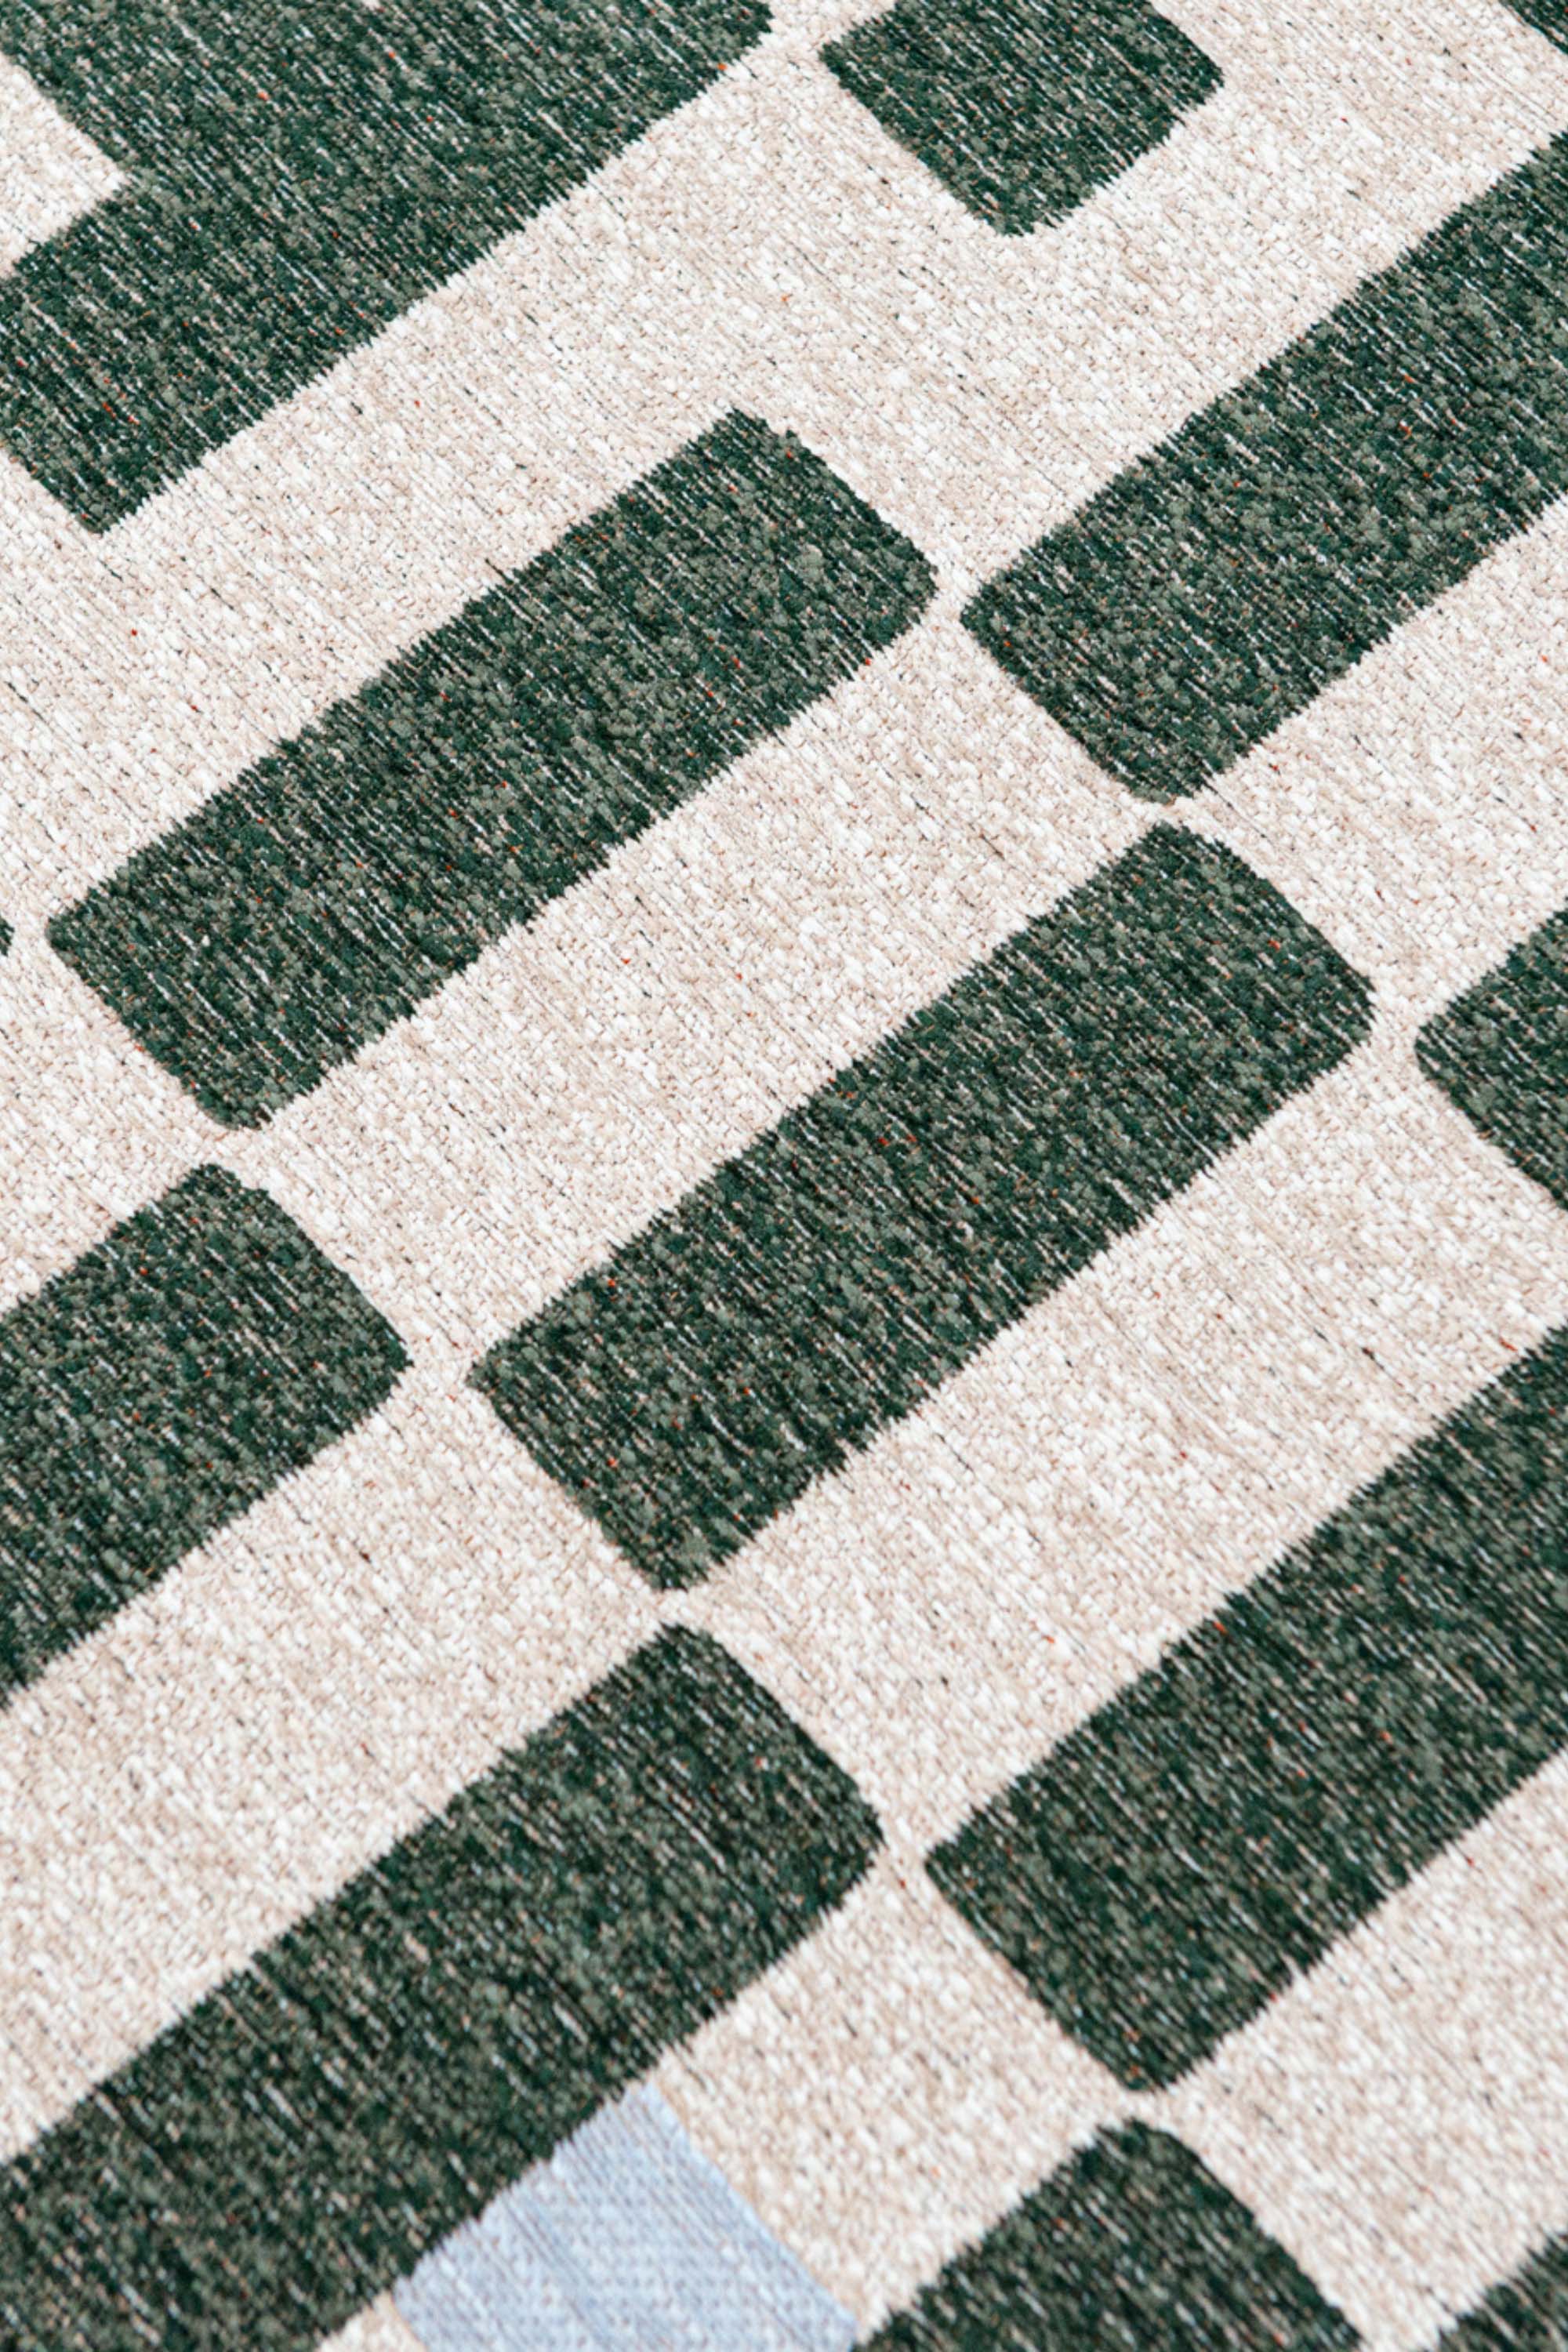 Abstract geometric rug with green, orange, and white tones